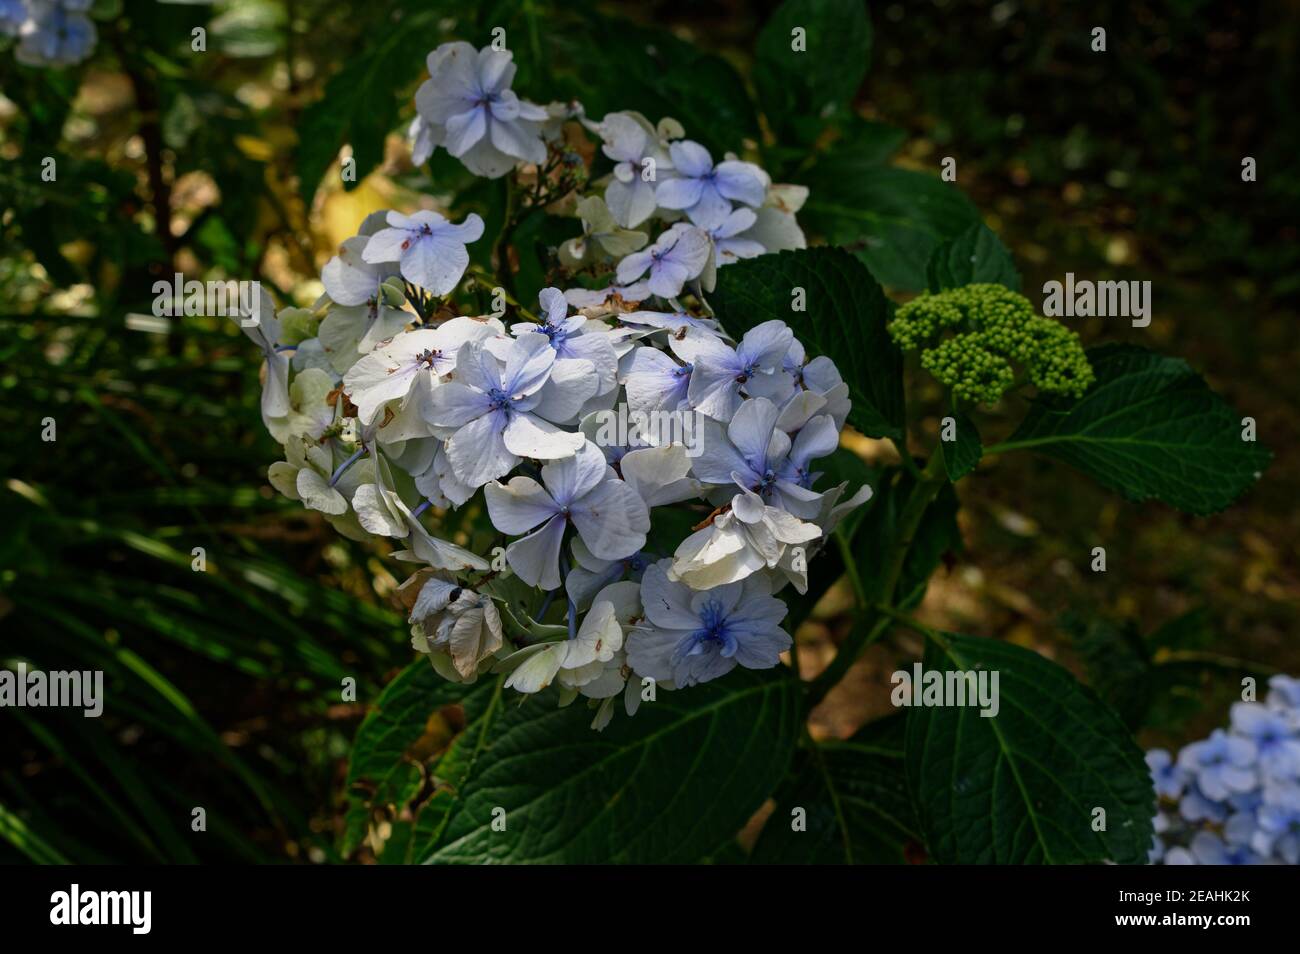 An old fashioned cottage garden plant, the hydrangea in flower. Stock Photo